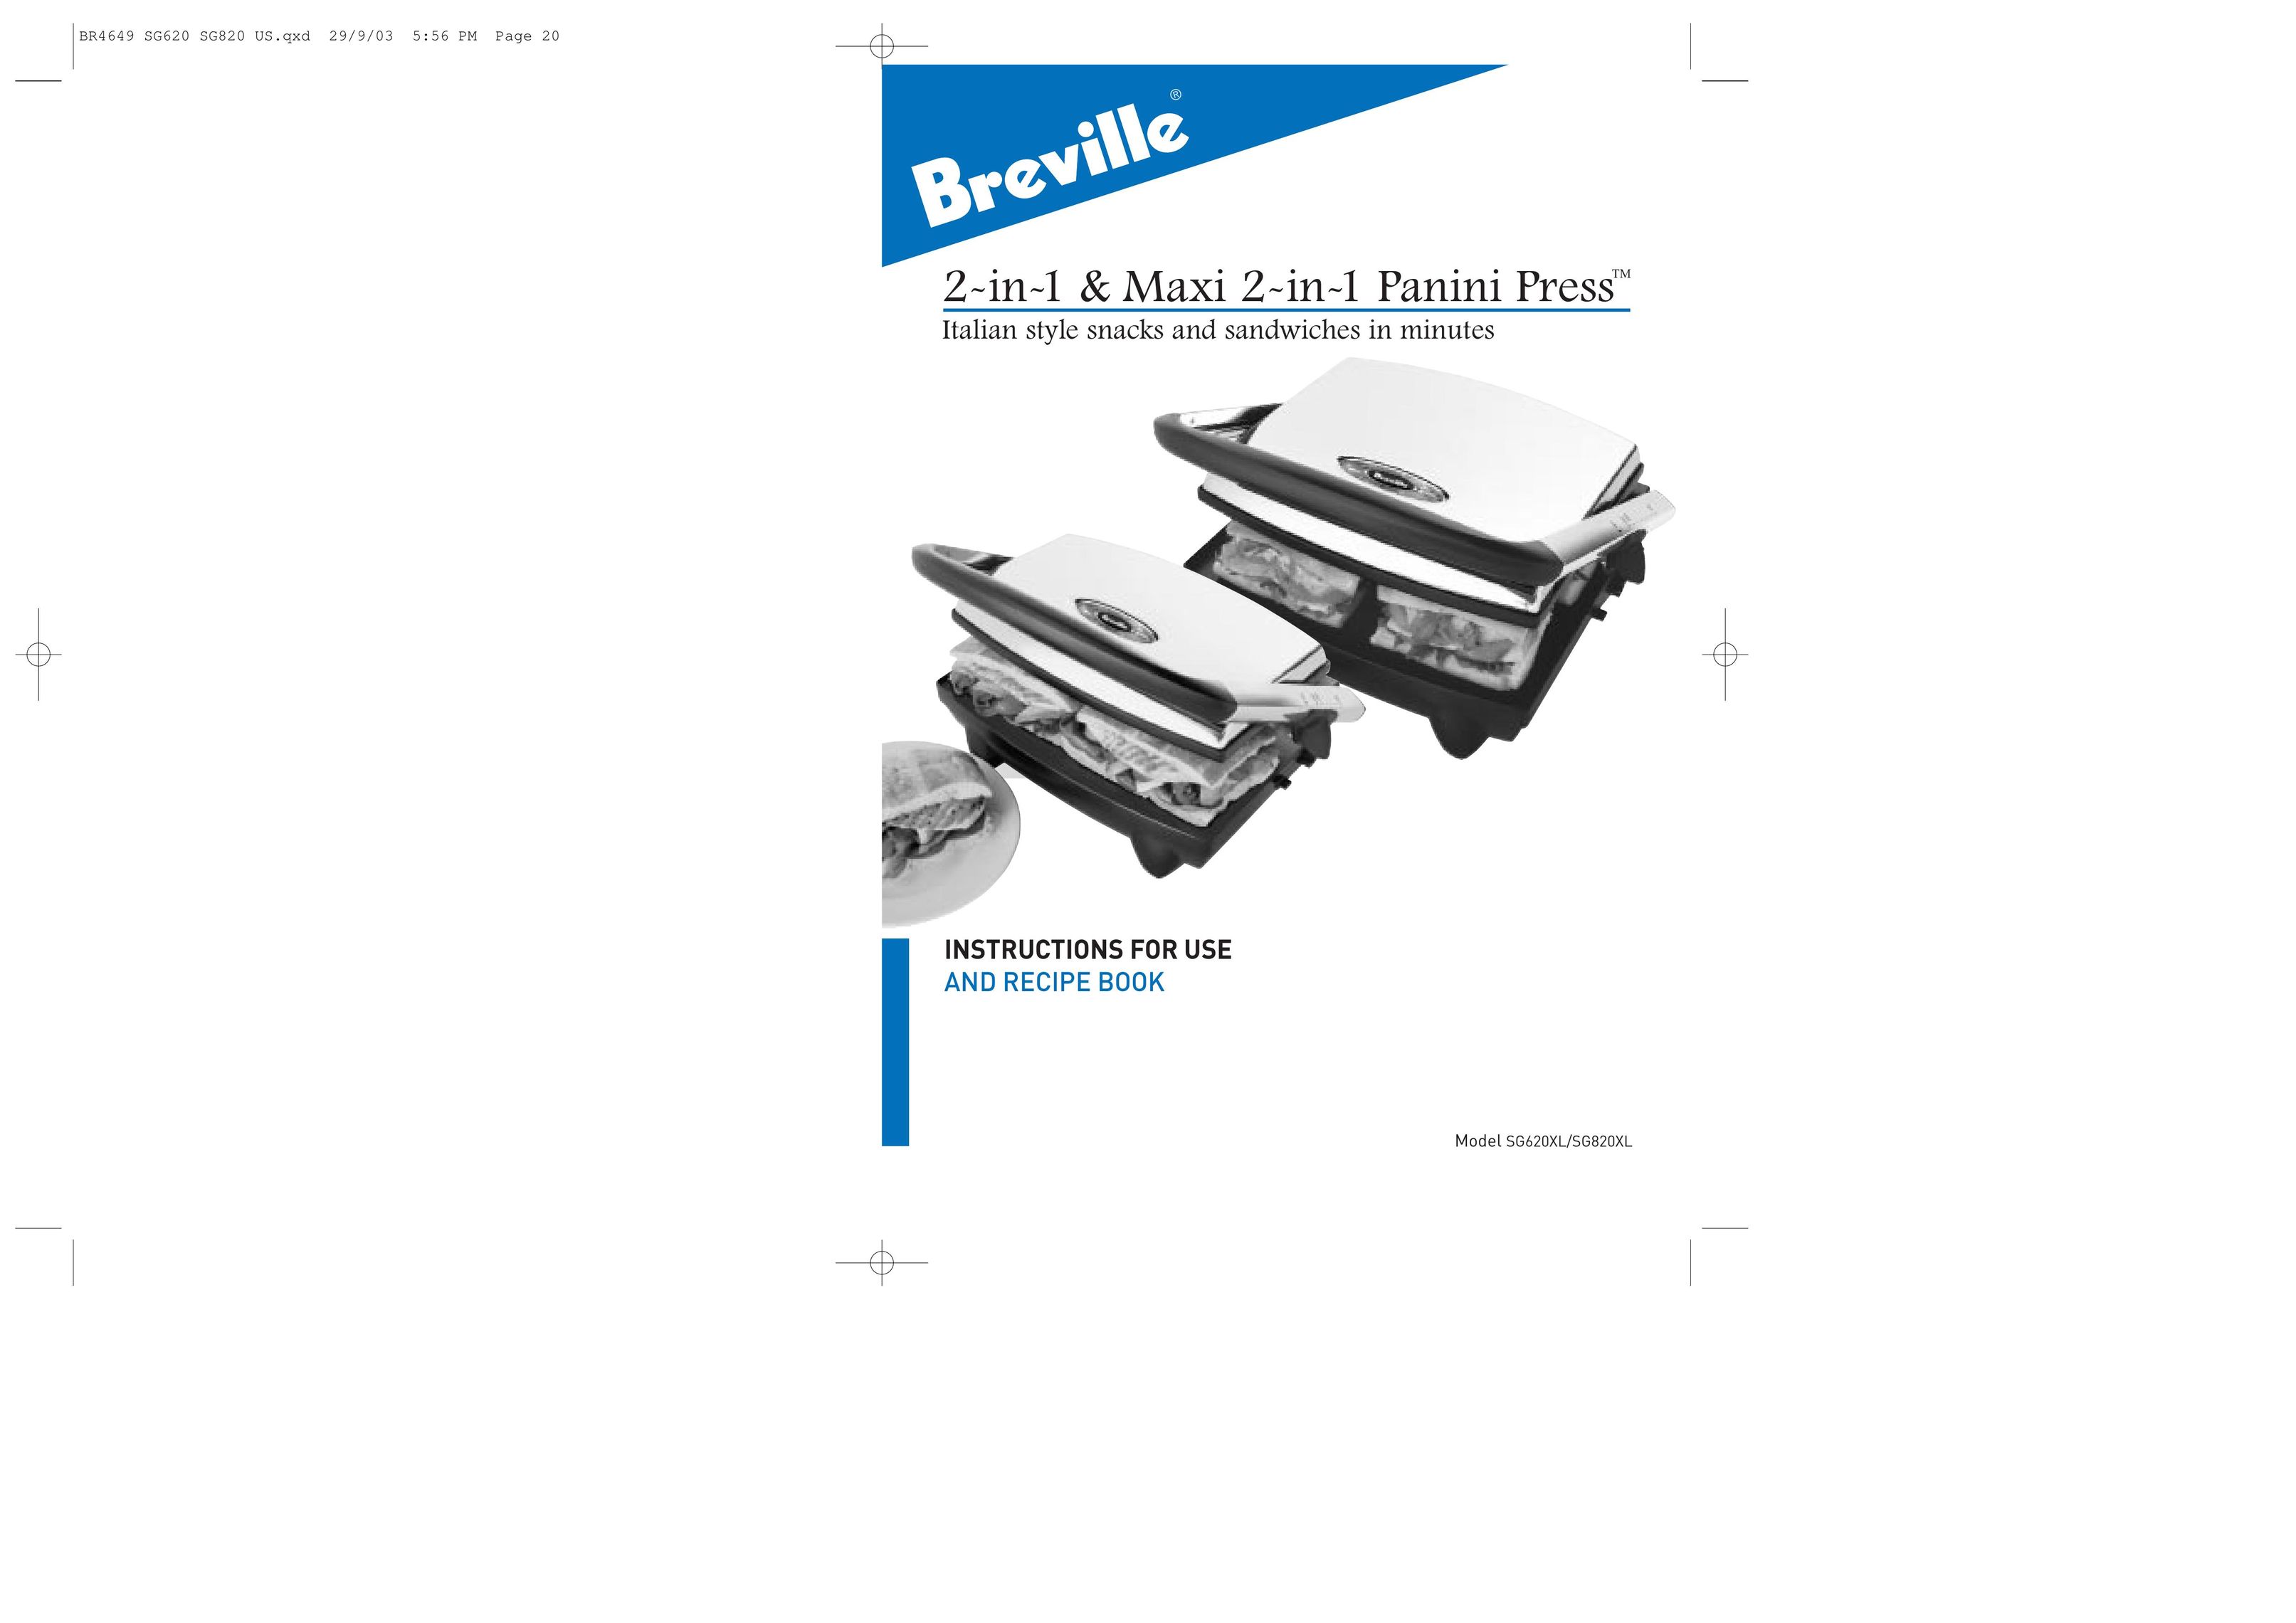 Breville SG820XL Kitchen Grill User Manual